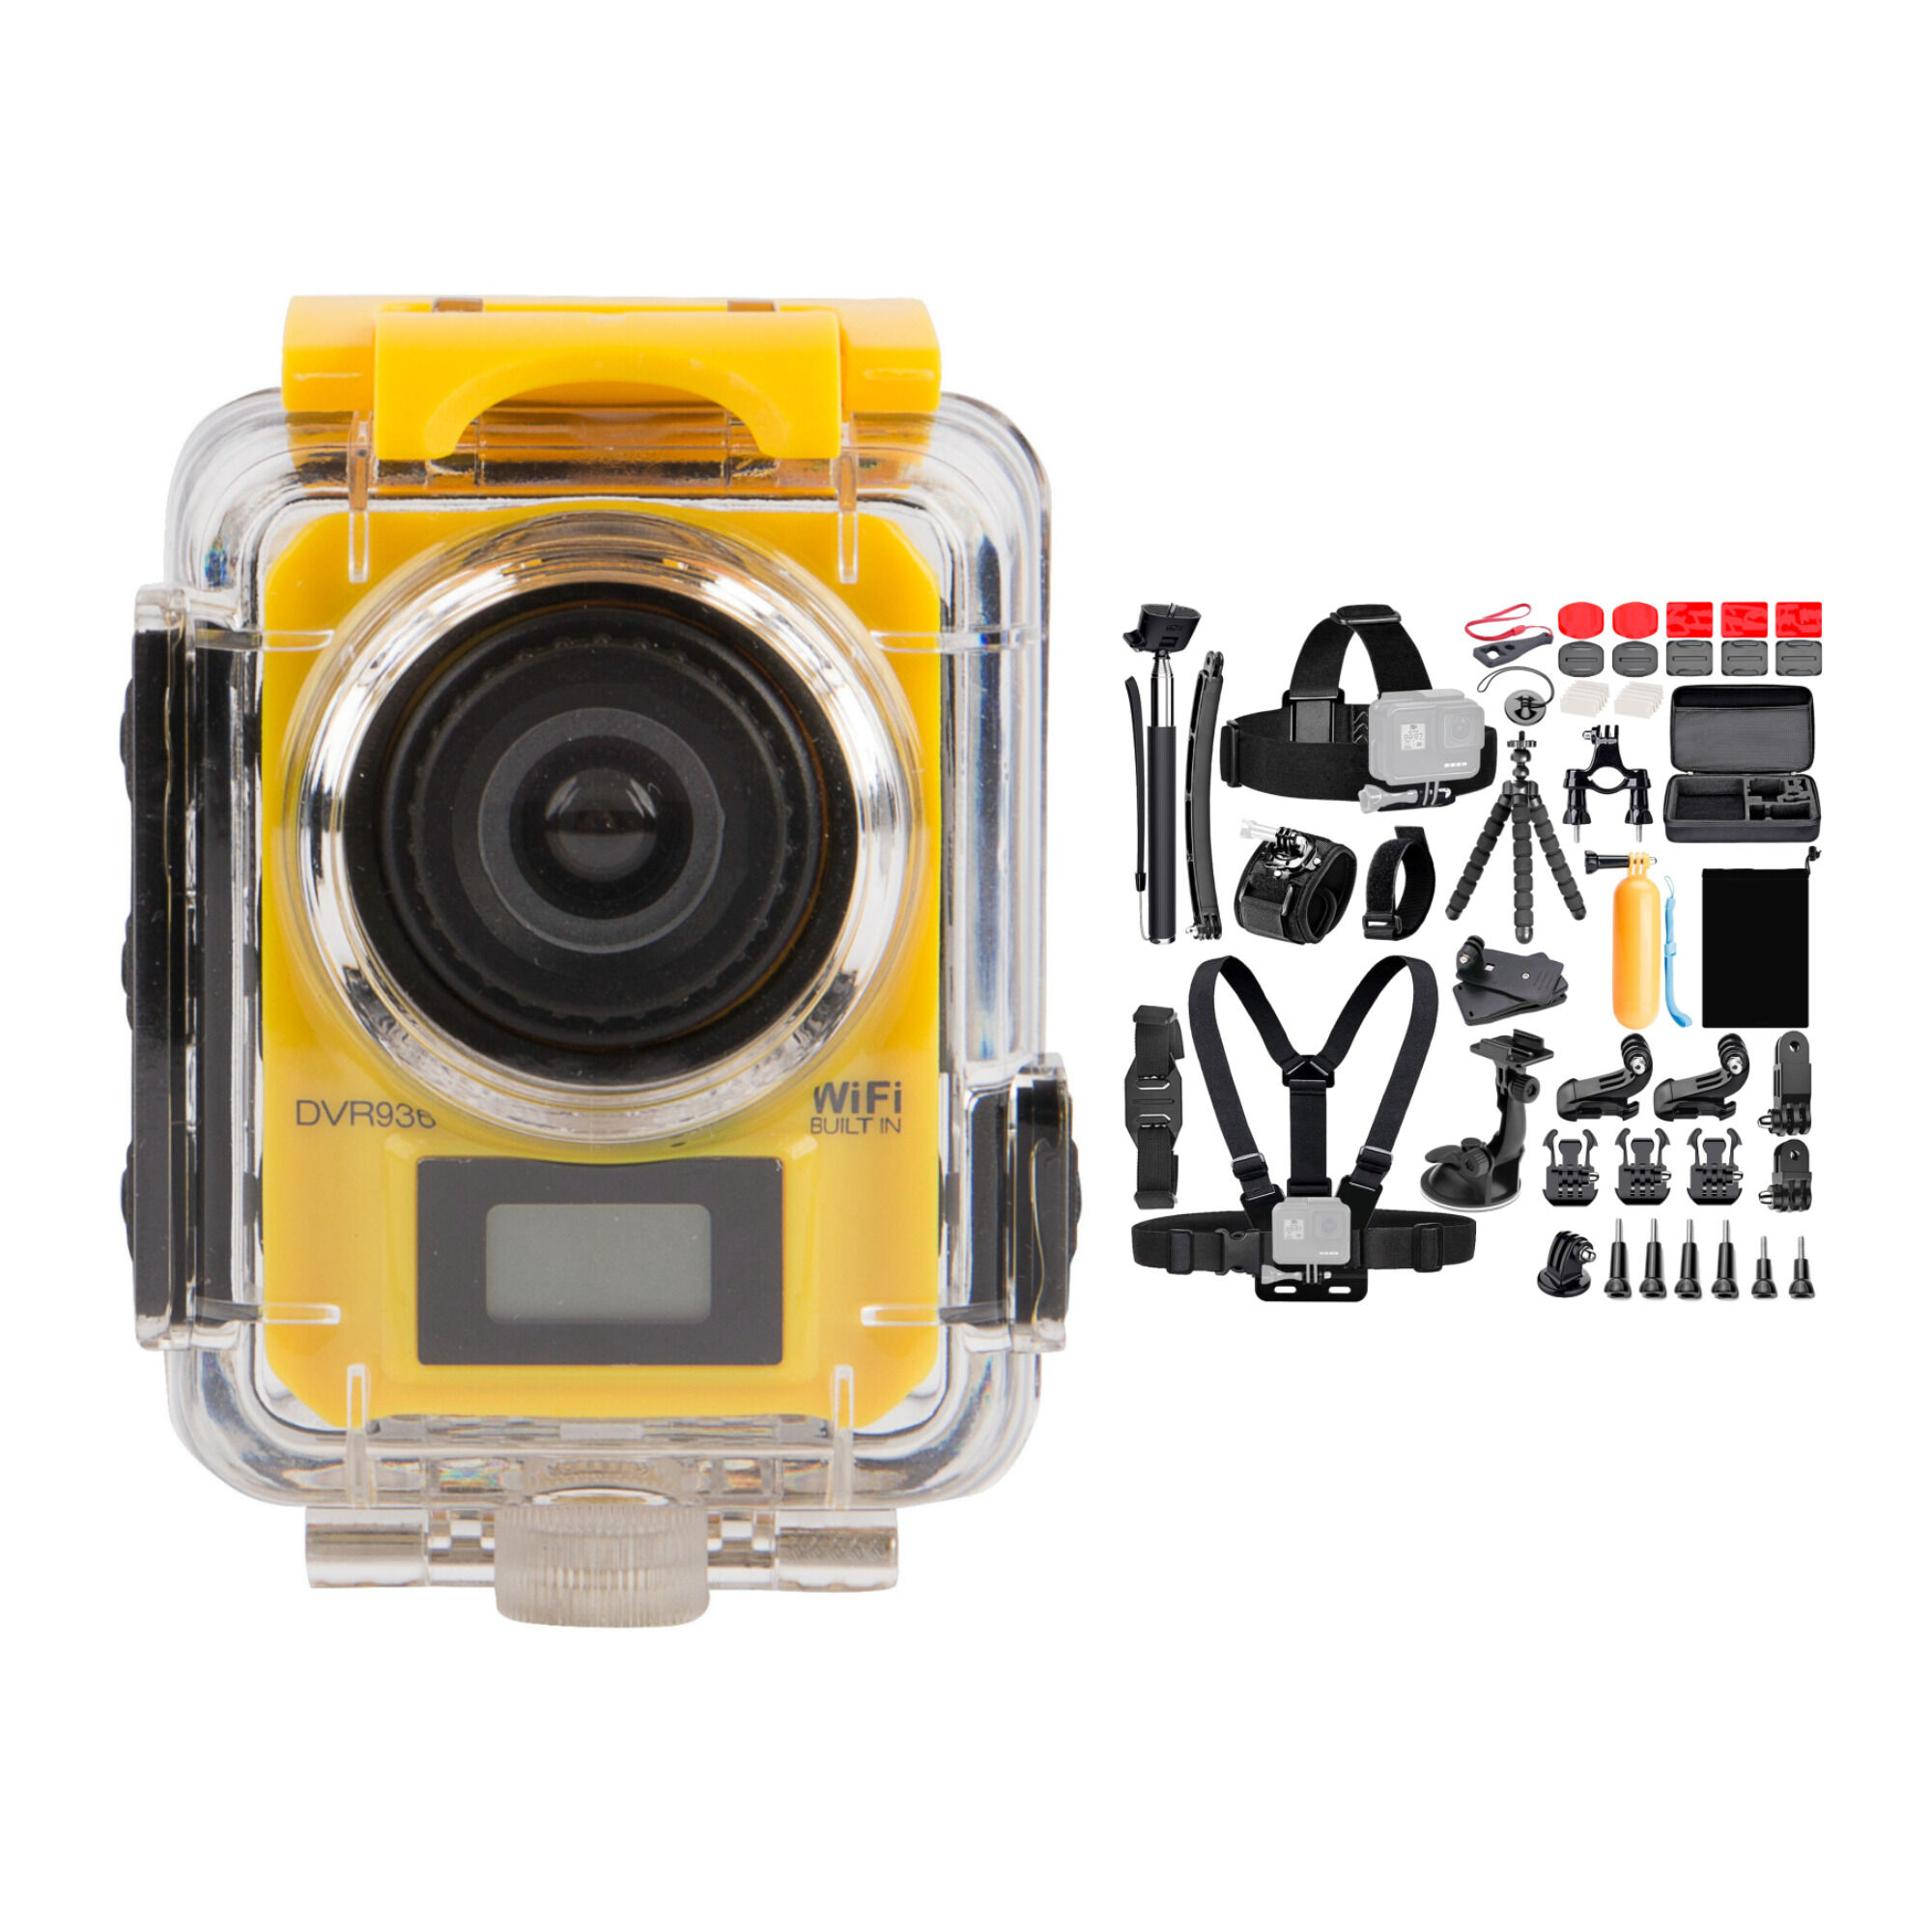 Vivitar DVR 936HD VR936HD Action Camera and Koah 50-In-1 Action Camera Accessory Kit in Yellow